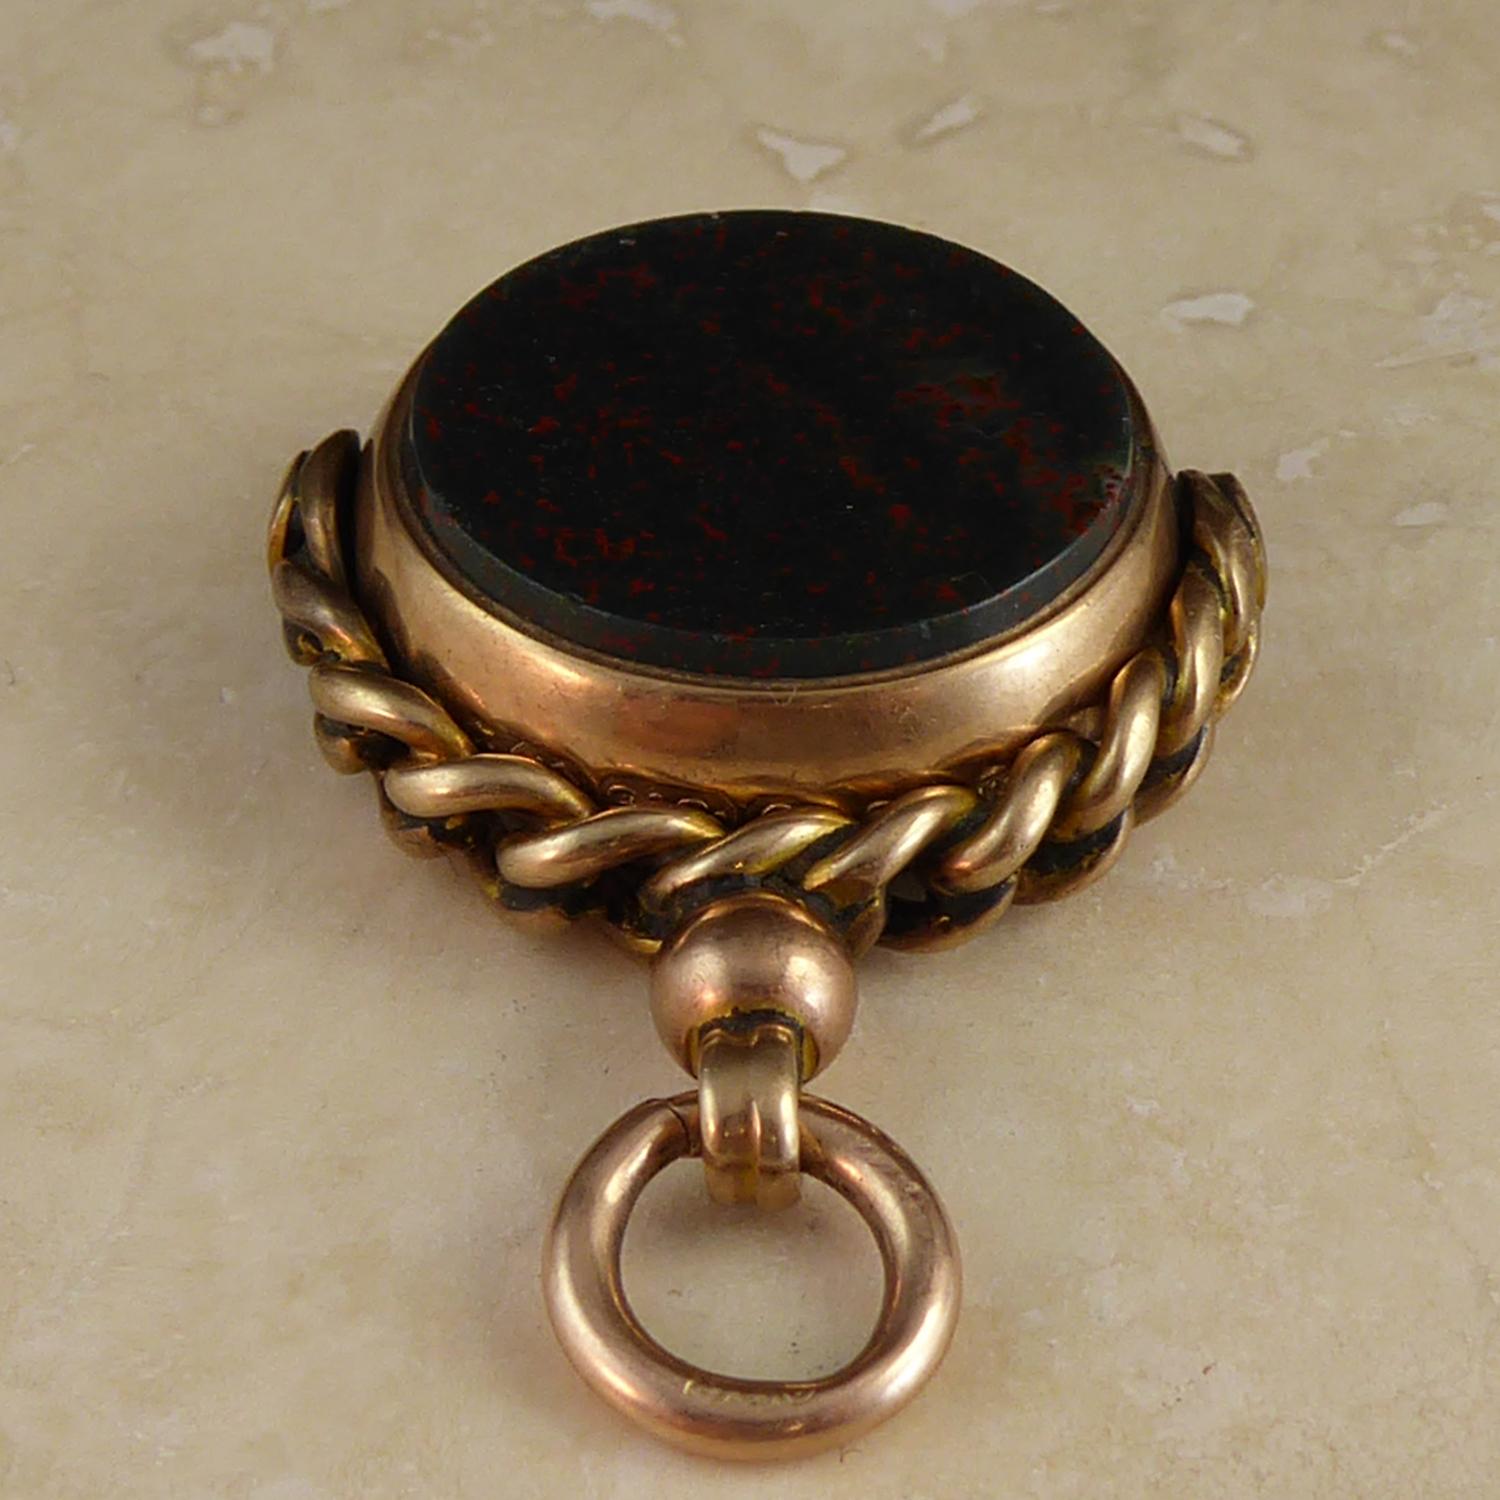 Originally seen on a pocket watch chain and often carved with a crest, spinner fobs such as this one also make an interesting pendant in a way that brings the antique into the present.  This one is in 9ct rose gold and bears the hallmark from the